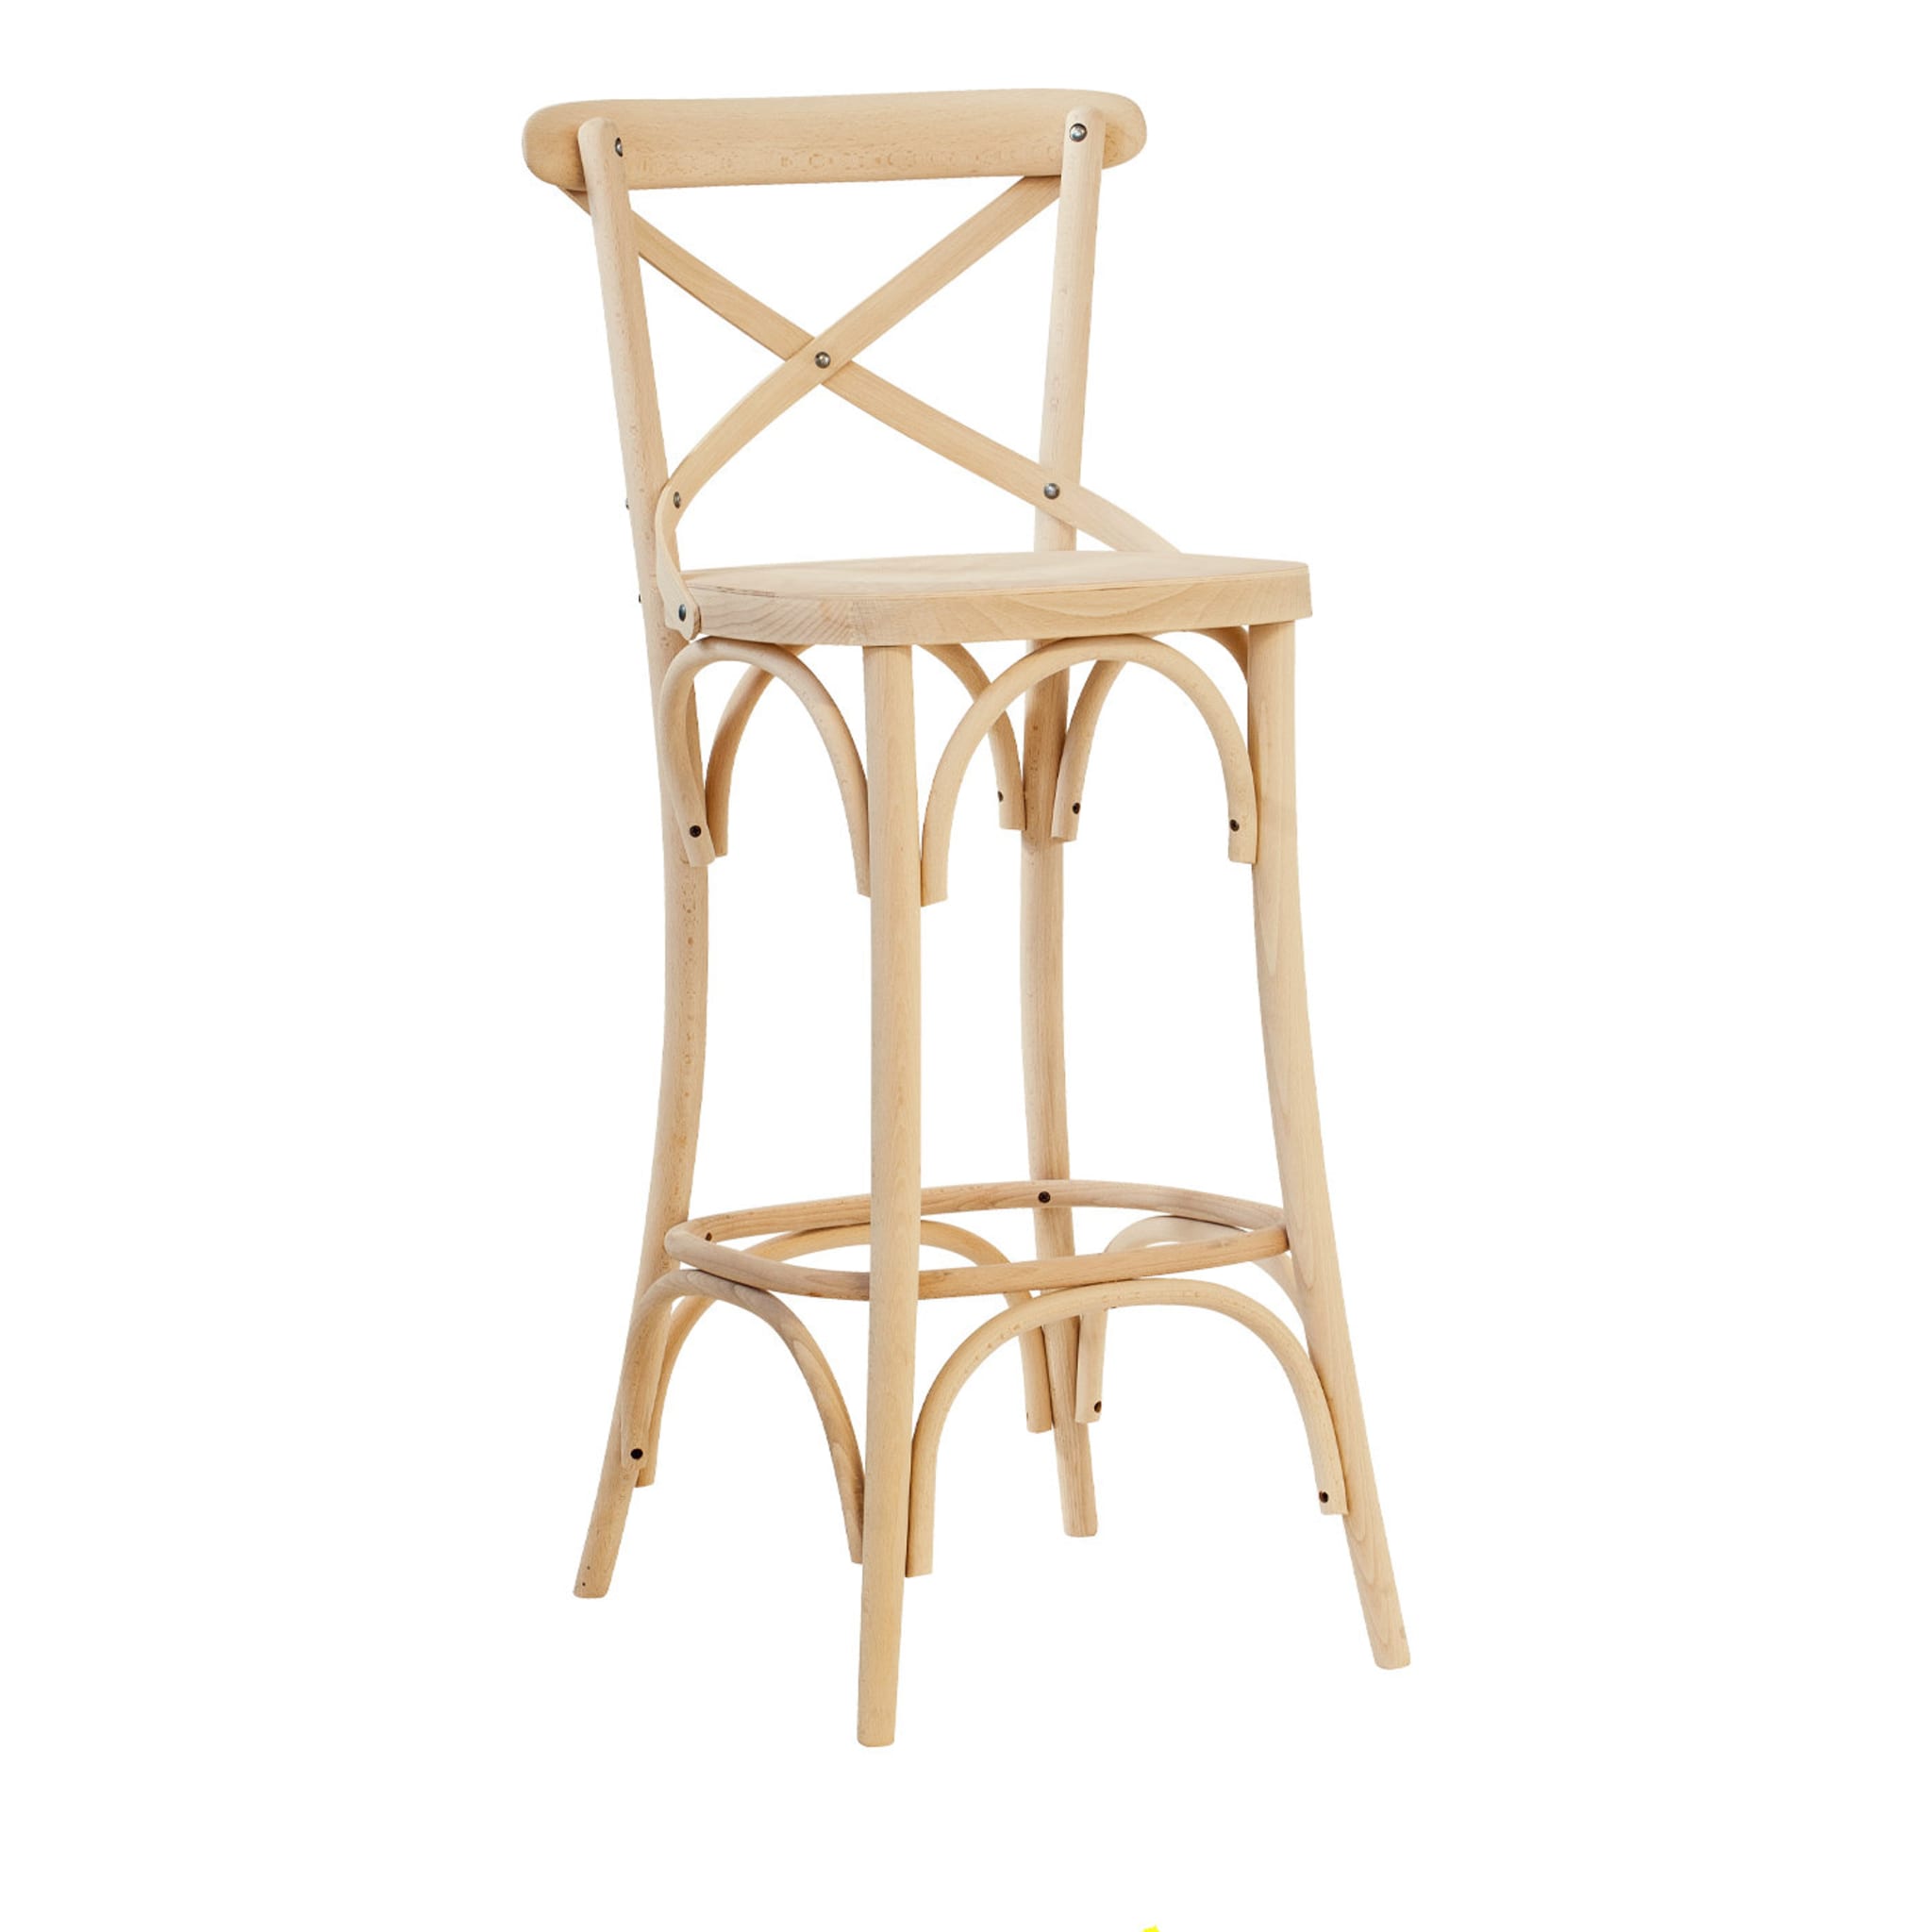 Ciao Beige Stool - Main view